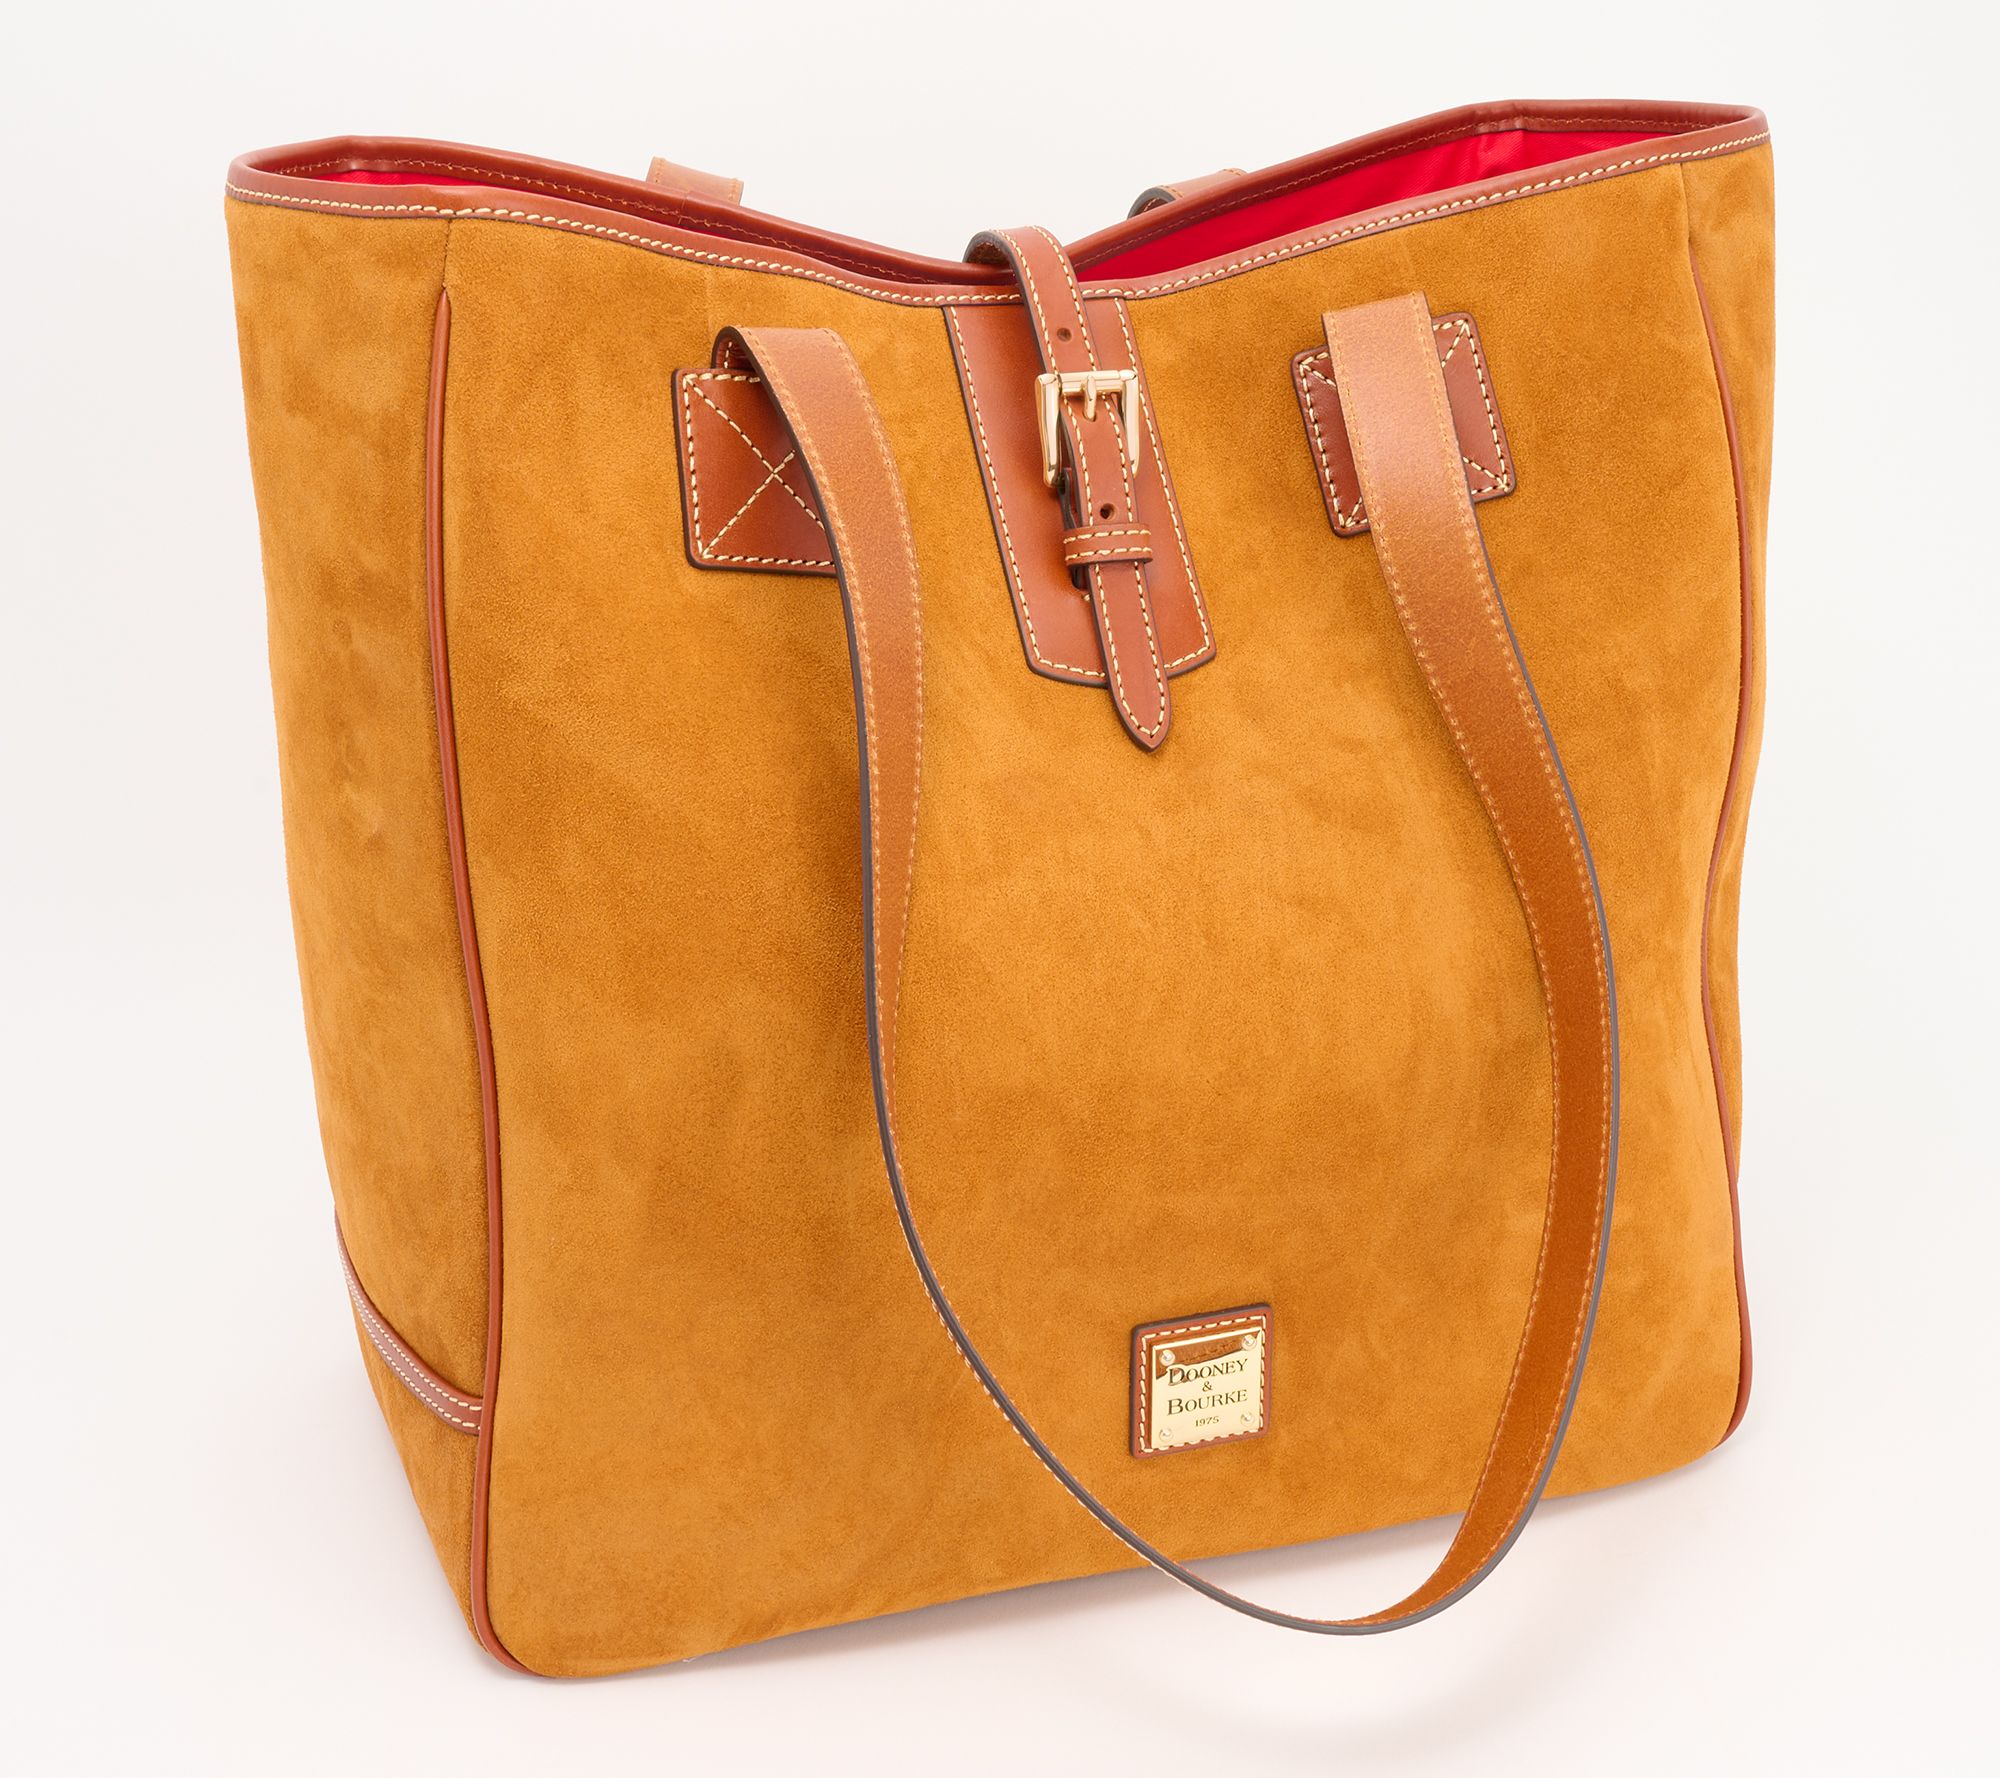 Louis Vuitton OnTheGo Womens Shoulder Bags, Orange, Free Size Inventory Confirmation Required